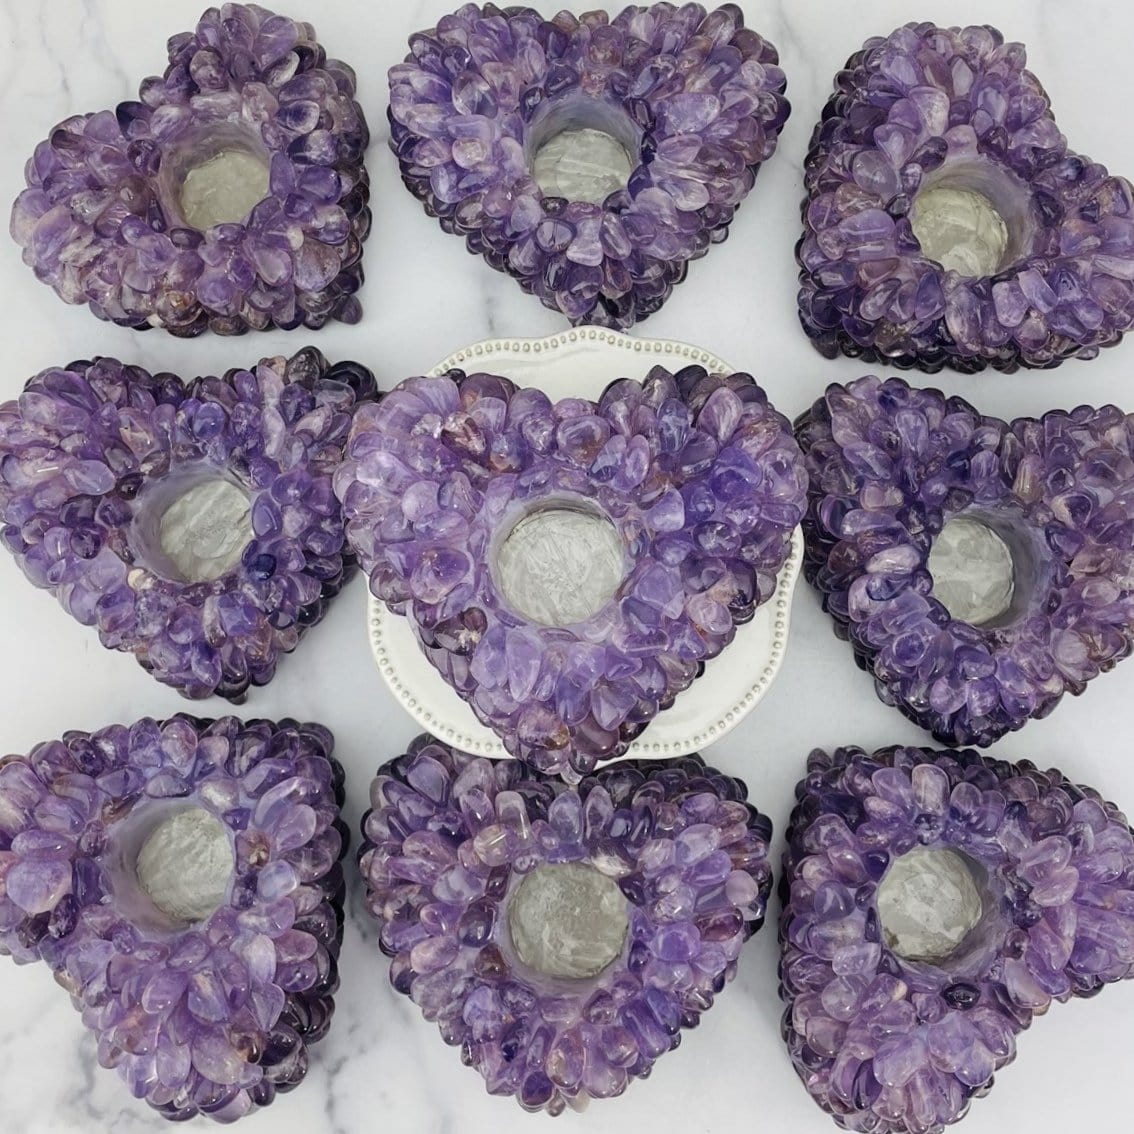 9 amethyst tumbled stone heart candle holders on marble background